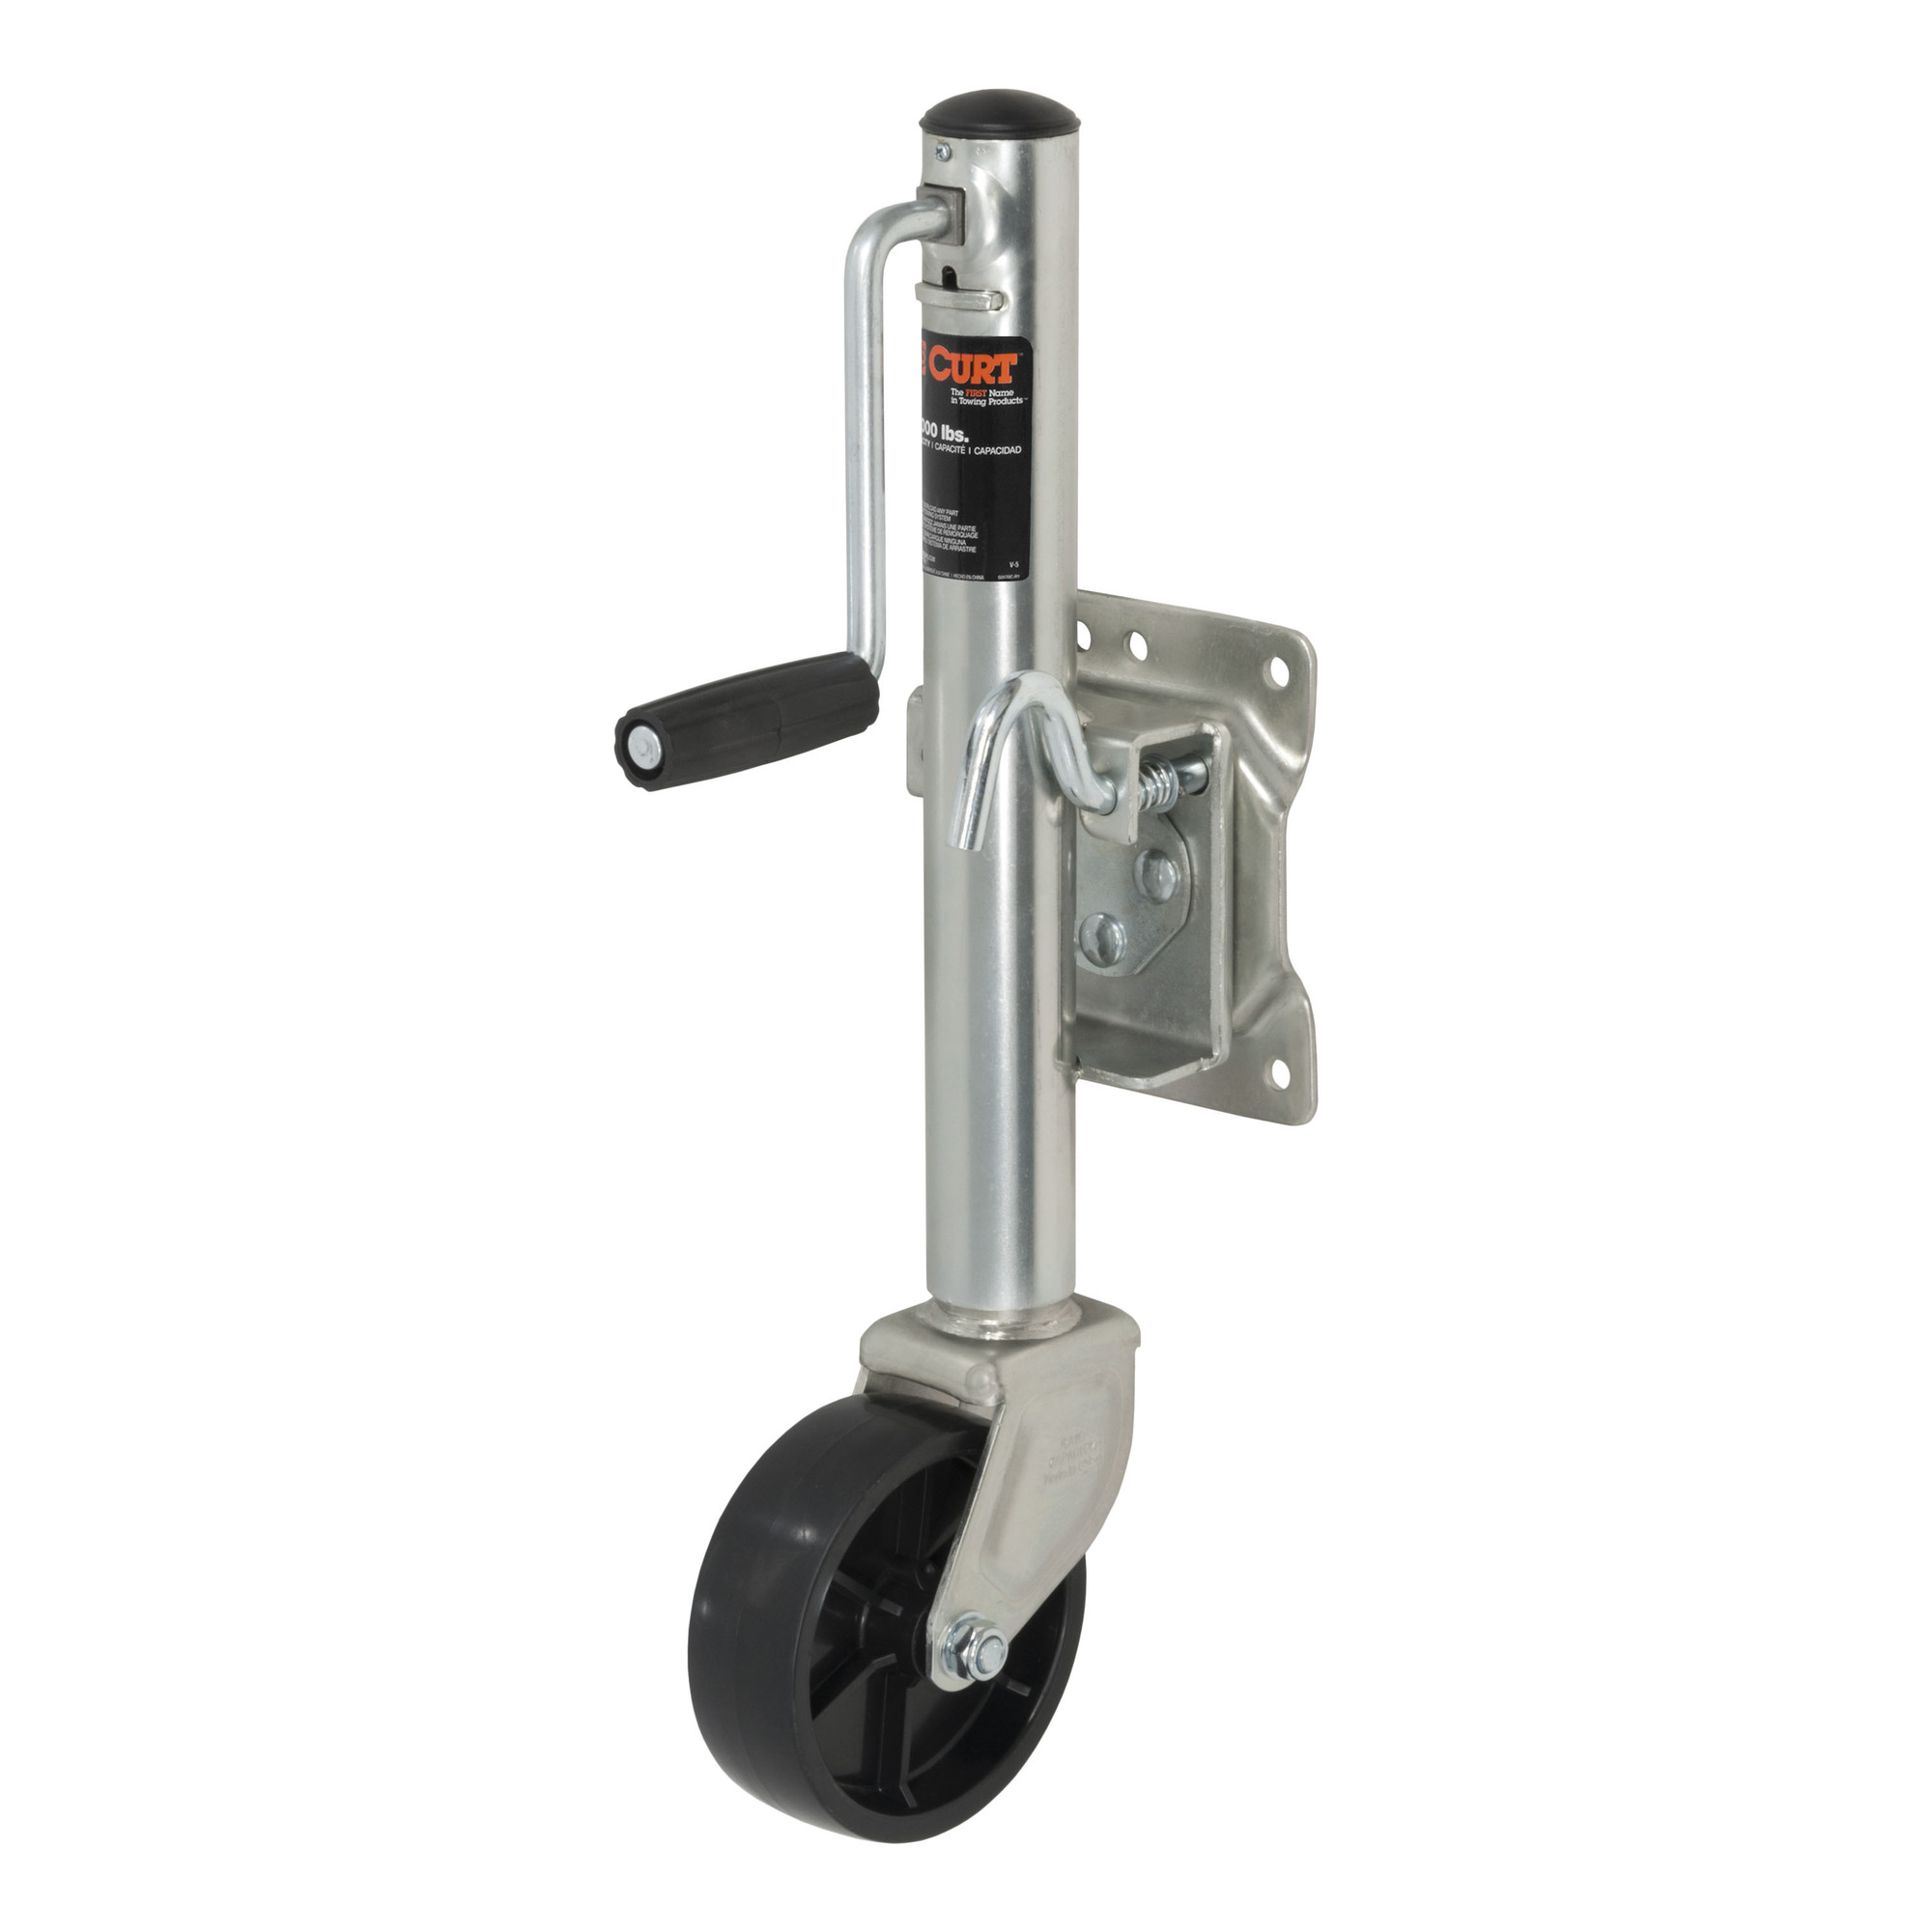 Curt Manufacturing, Marine Jack w 6Inch Wheel 1200 lbs, 10Inch Travel, Lift Capacity 1200 lb, Jack Type Marine and Swivel, Mount Type Bolt-On, Model